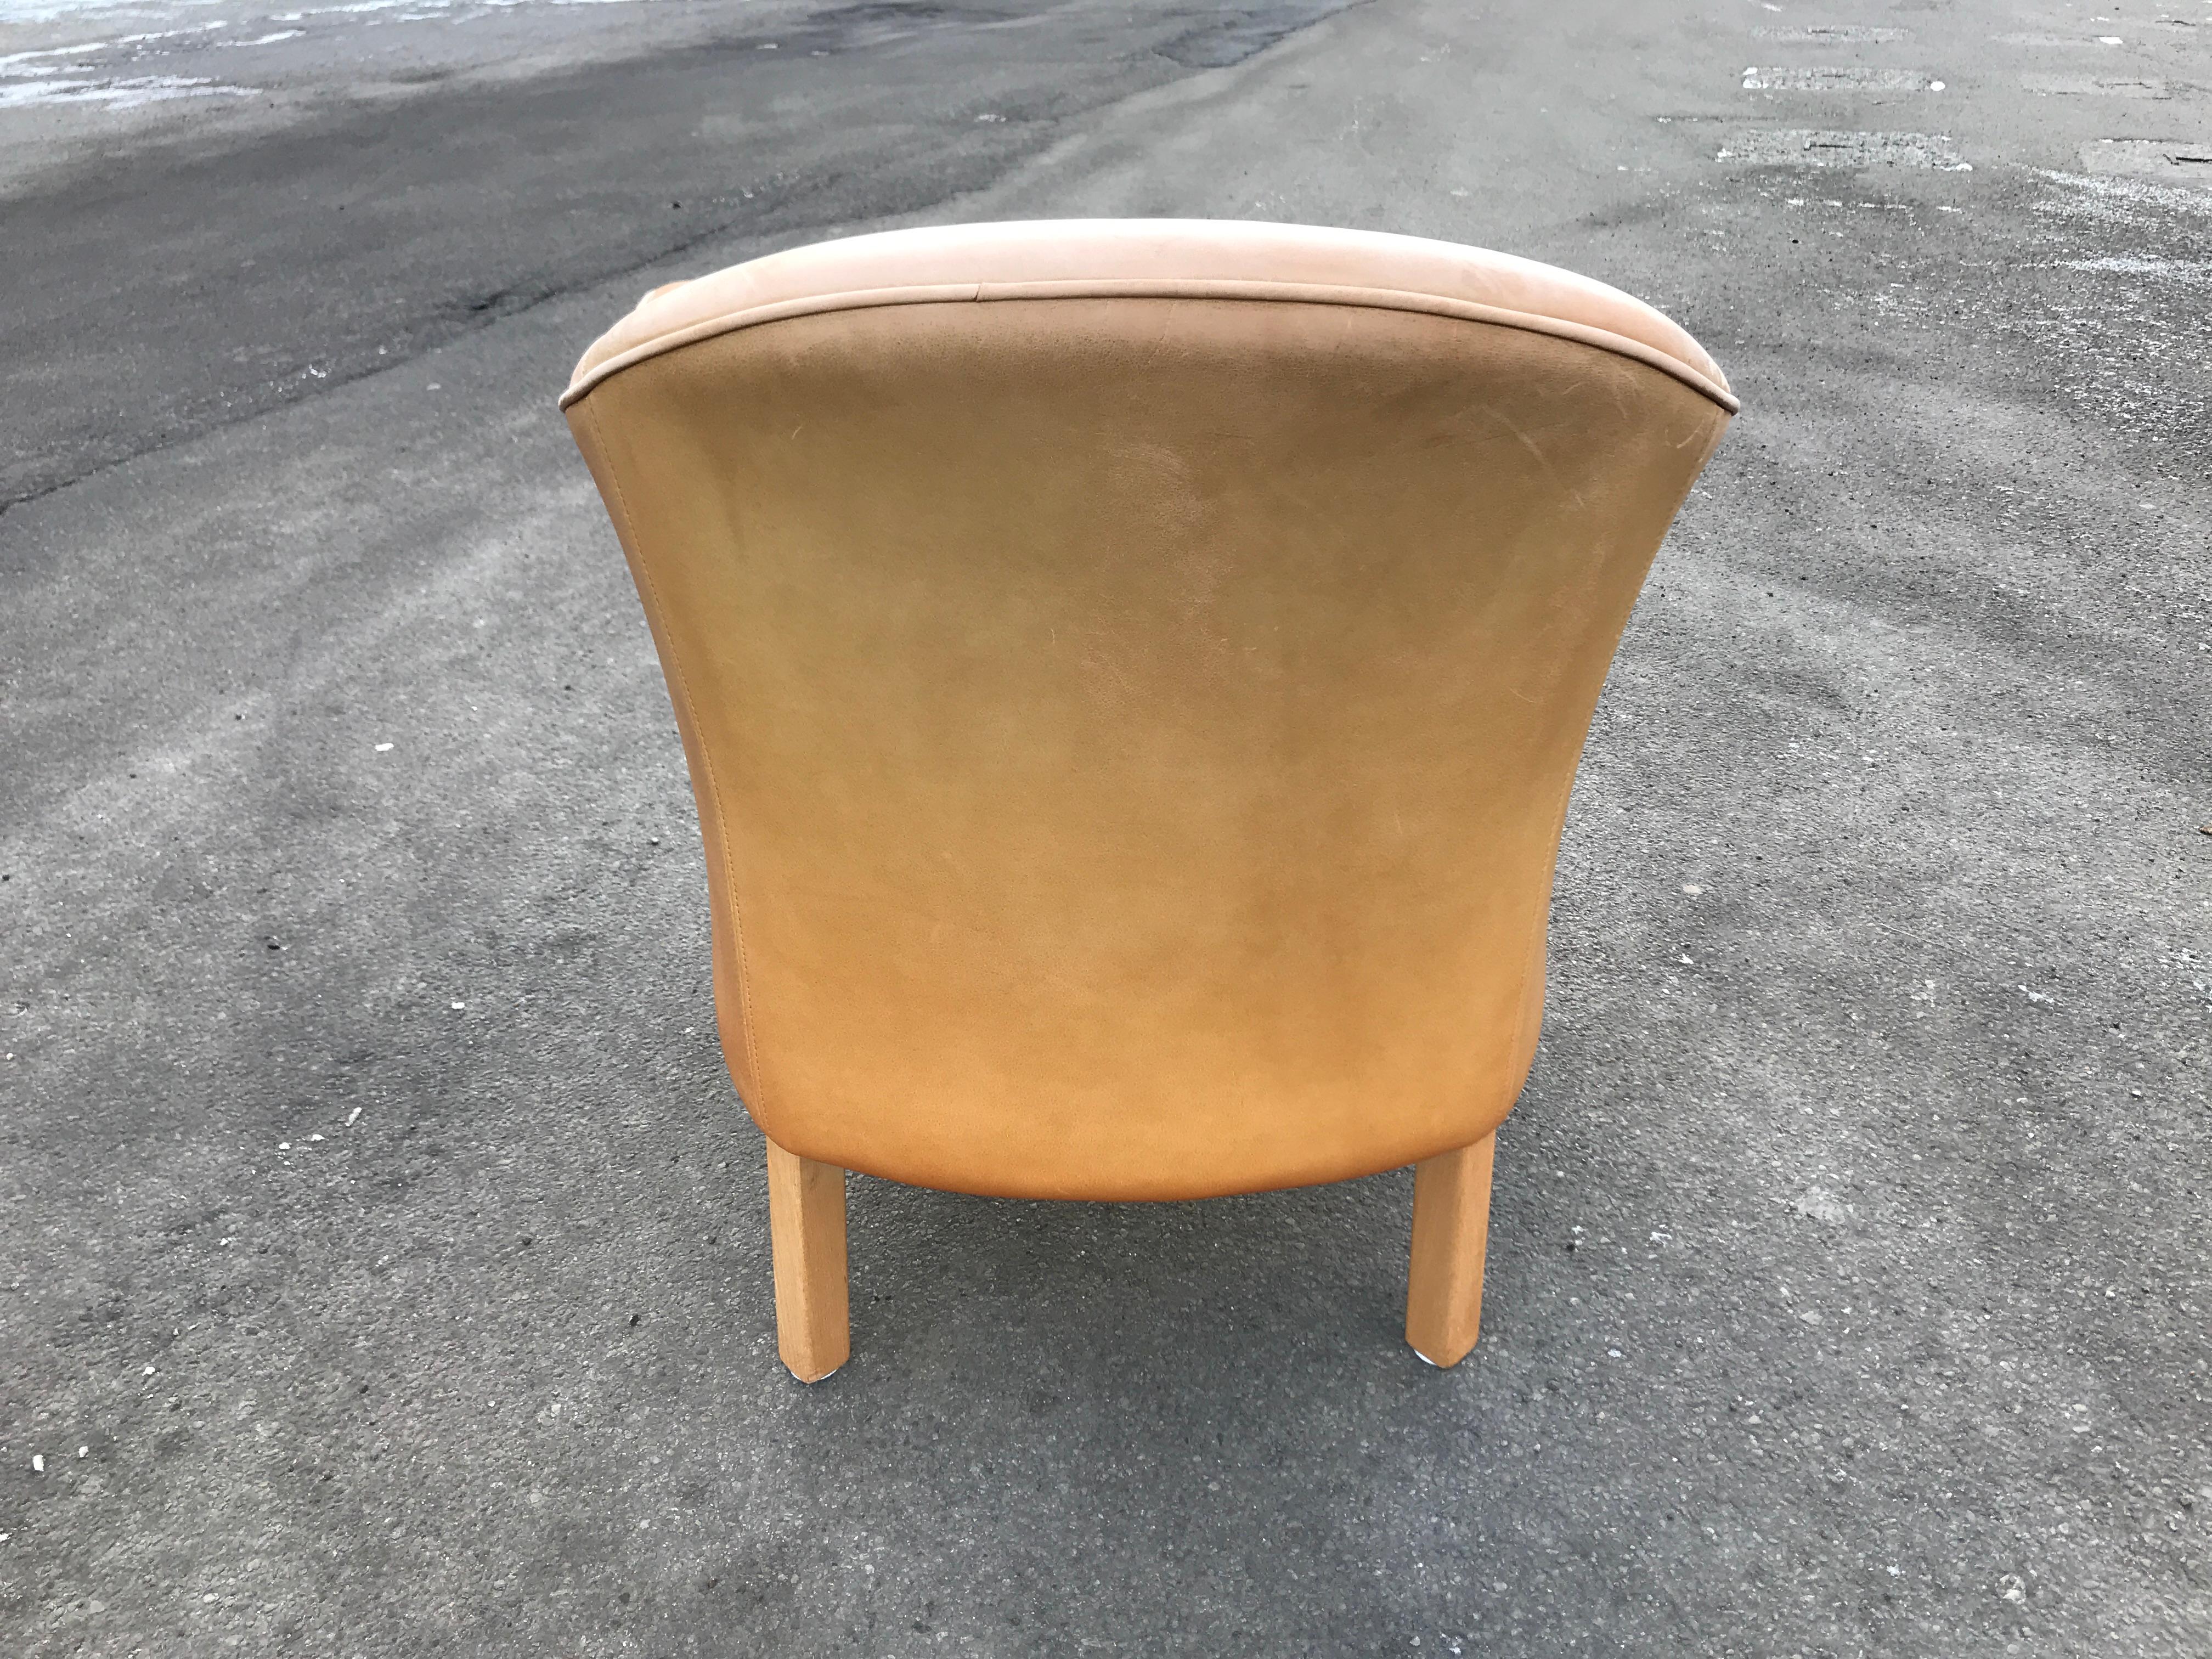 queen chairs for sale